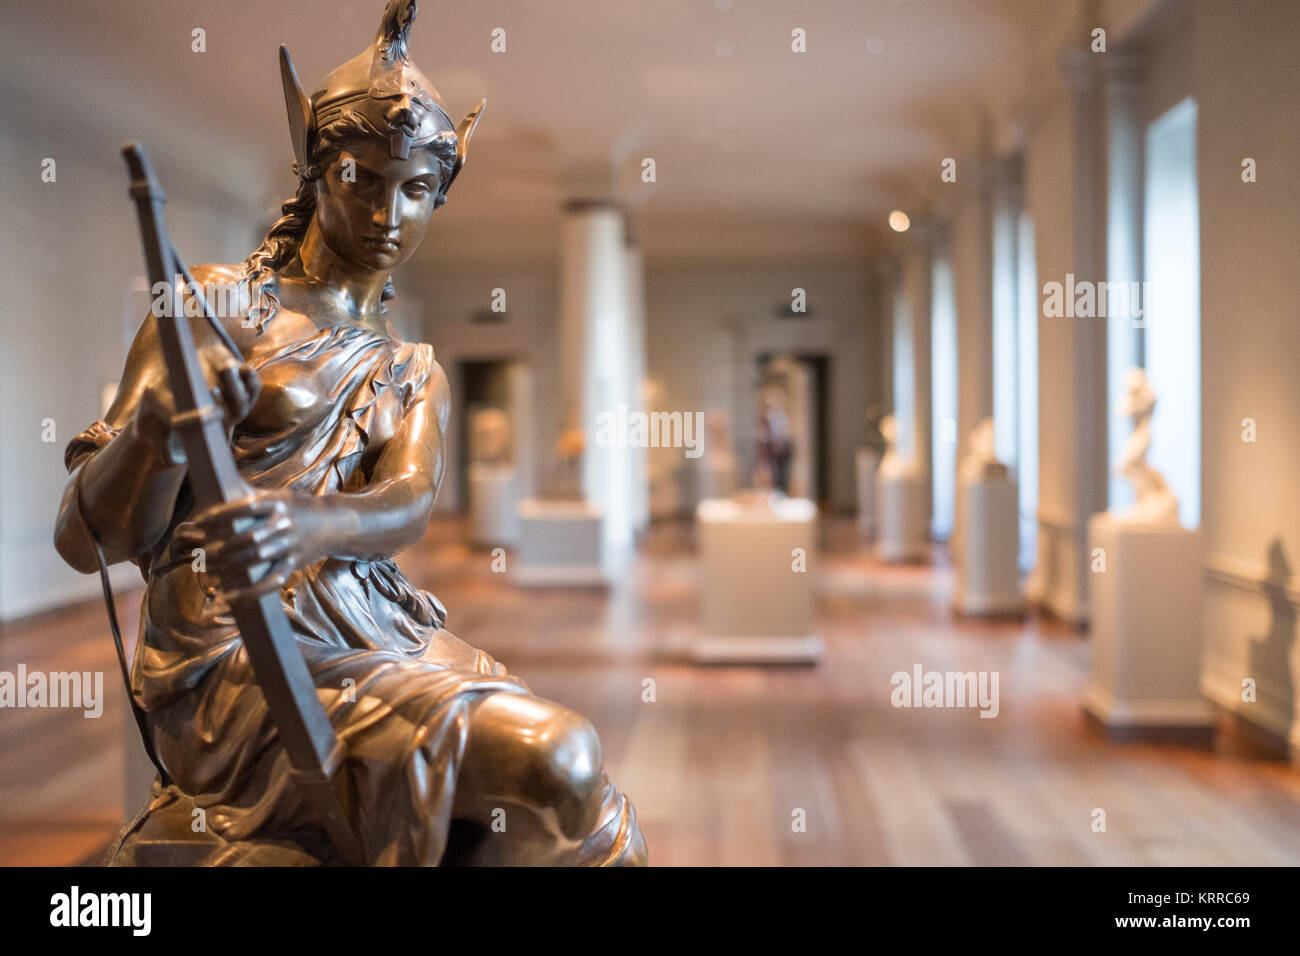 WASHINGTON DC, United States — A sculpture on display at the National Gallery of Art in Washington DC. The National Gallery of Art is renowned for its collection of European and American art, offering a comprehensive timeline of artistic development from the Middle Ages to the present day. Its esteemed status as a free public museum underscores its national significance and commitment to art education. Stock Photo